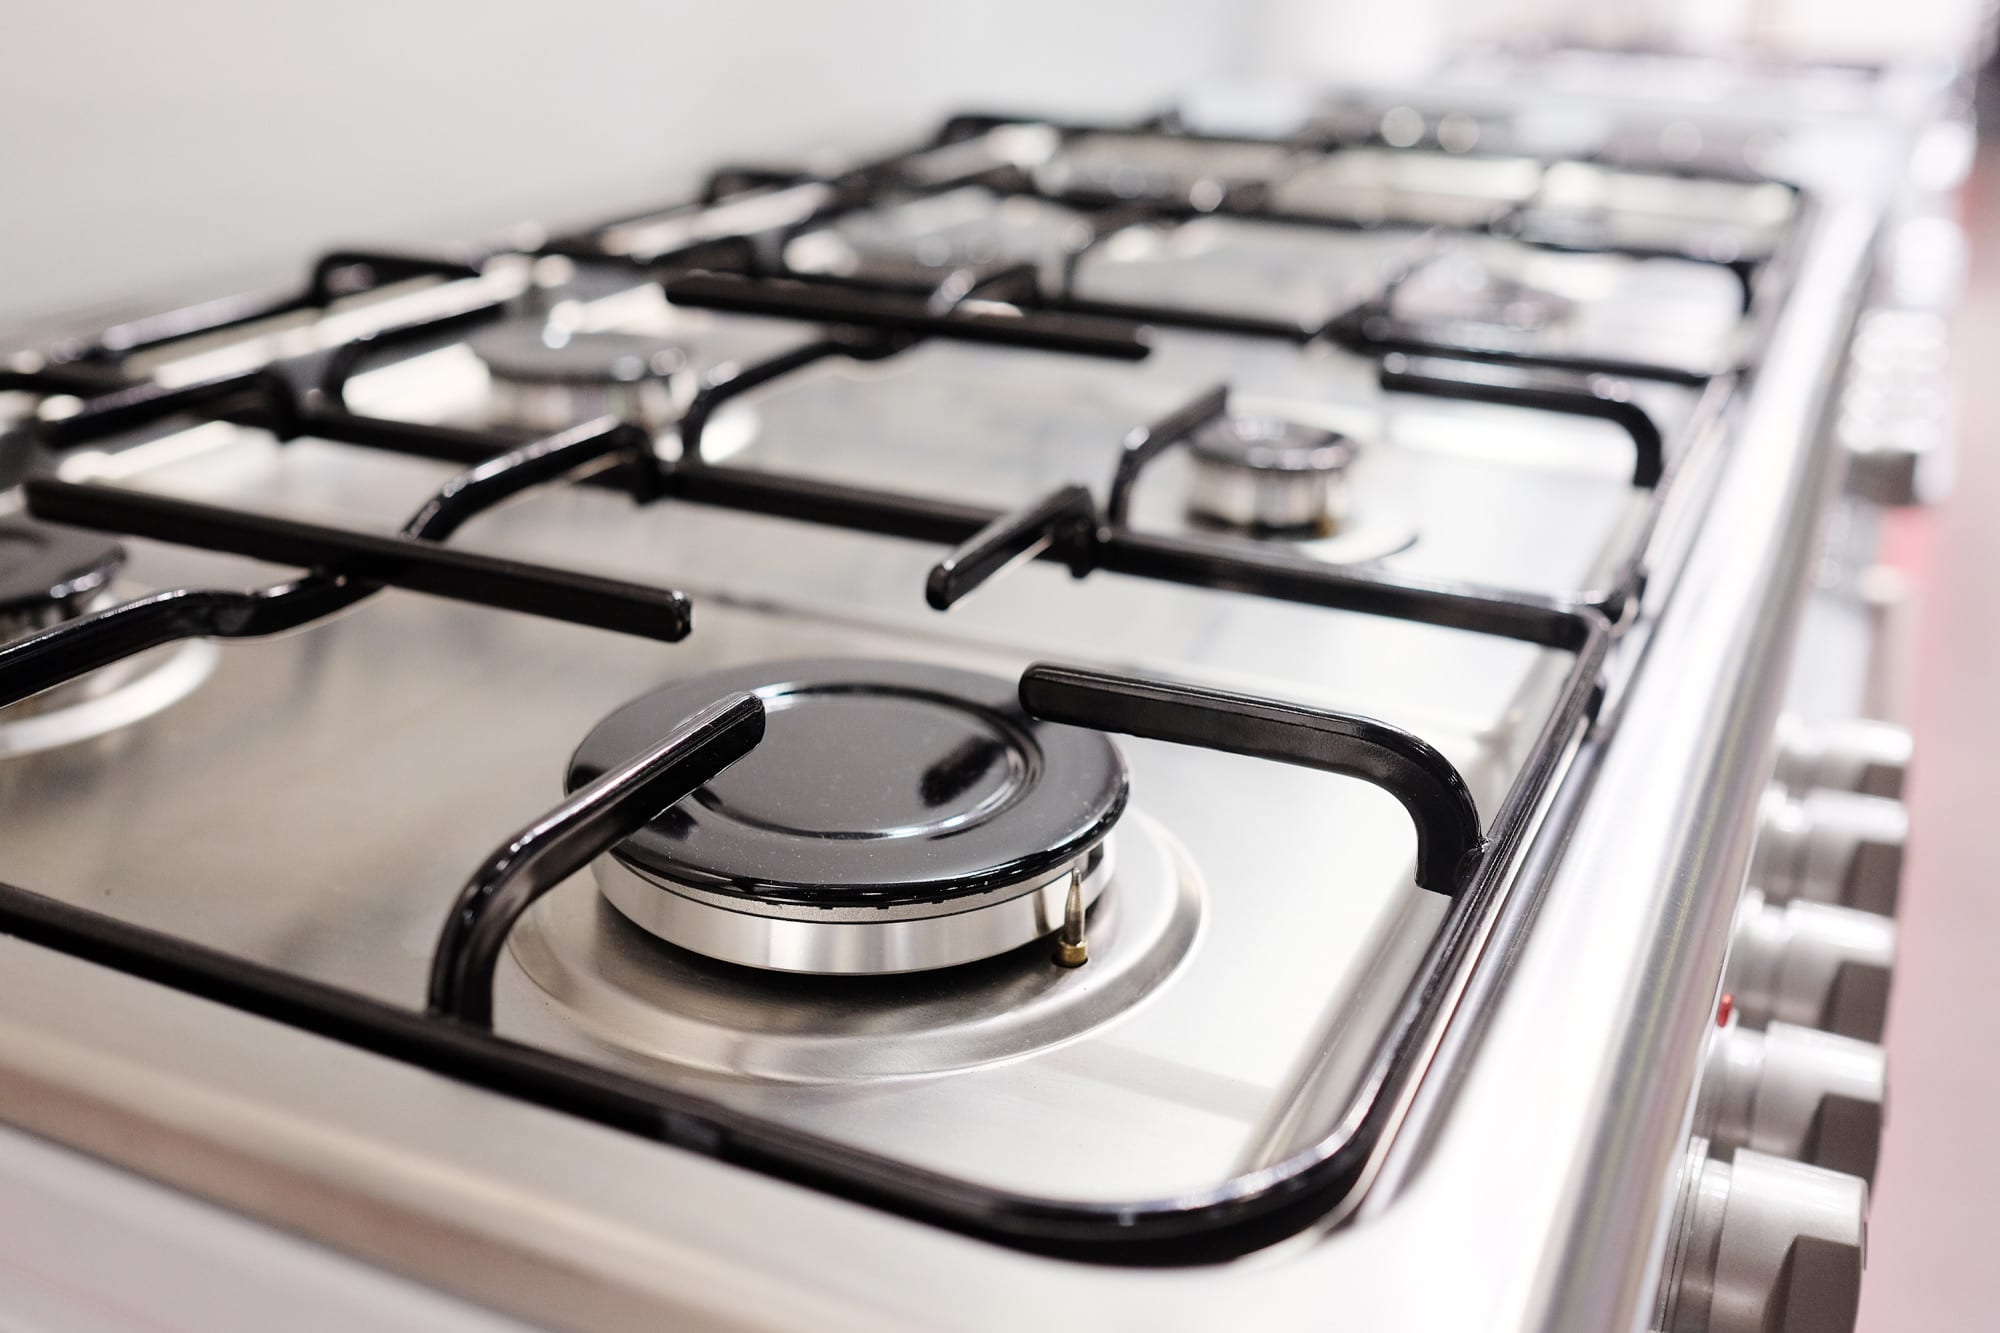 Gas vs. Electric Stoves: Which is Better?